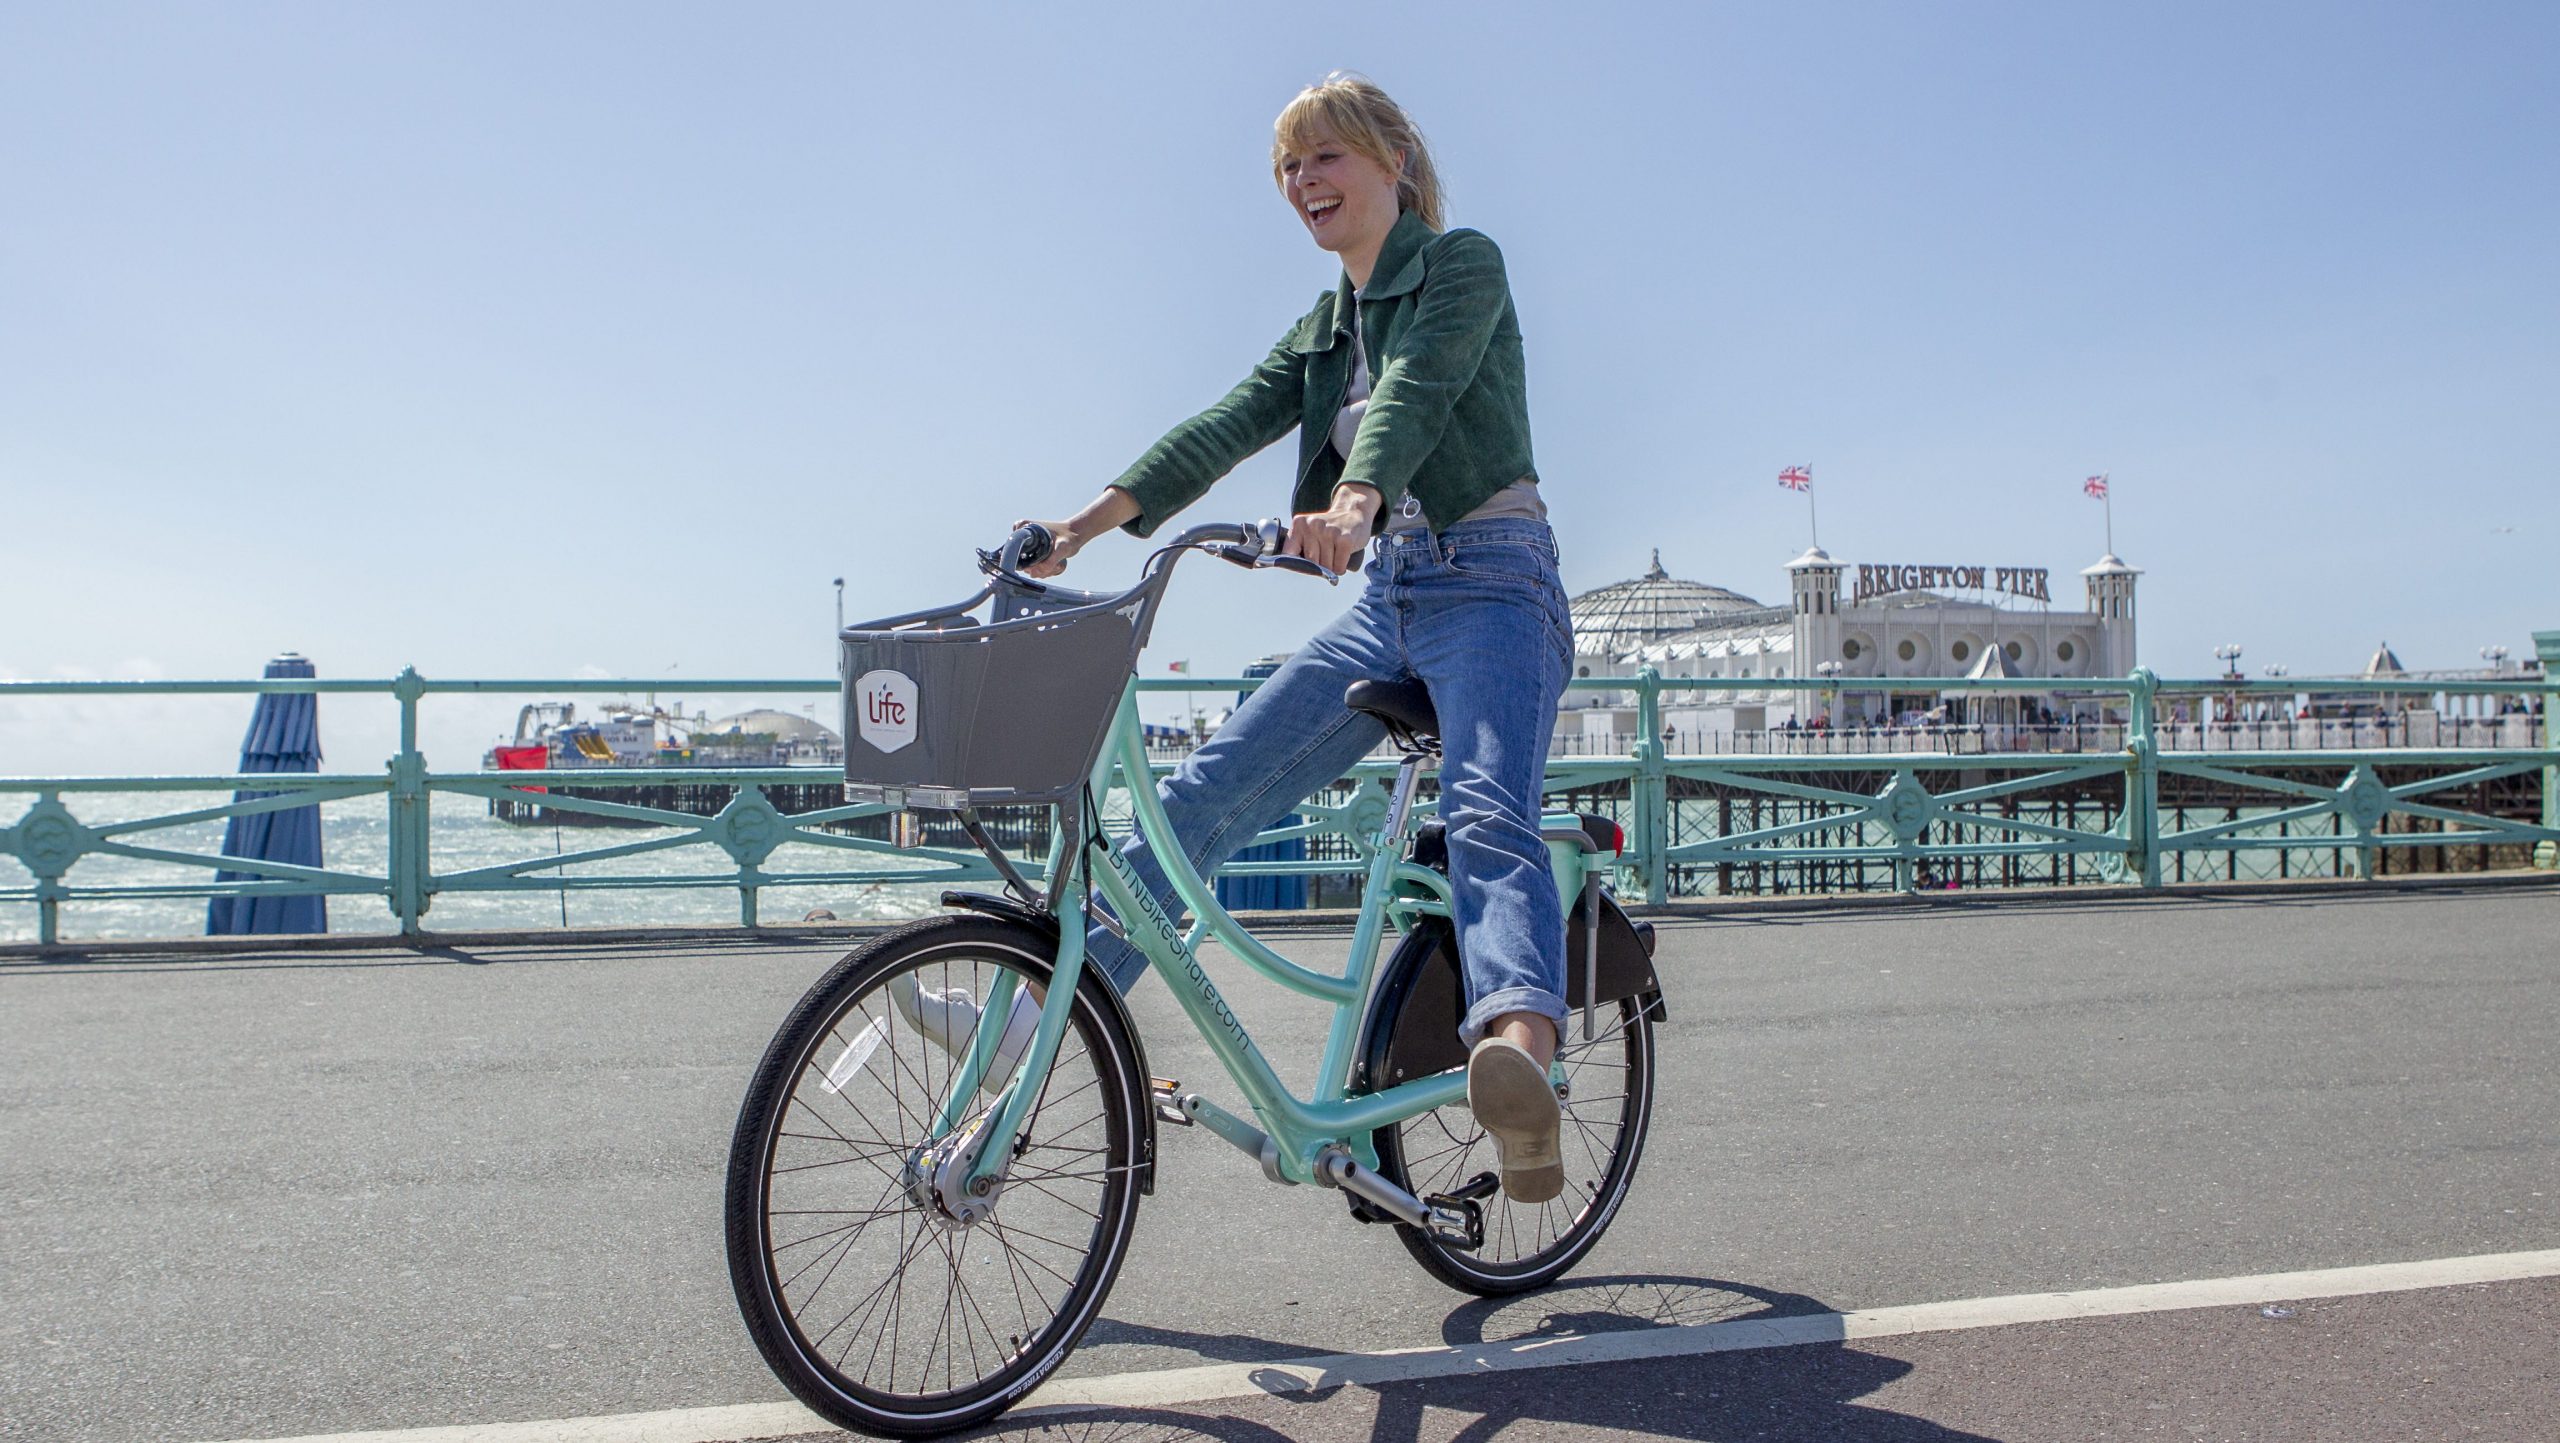 A picture of a woman riding a bike down Brighton Beach, with the pier in the background.